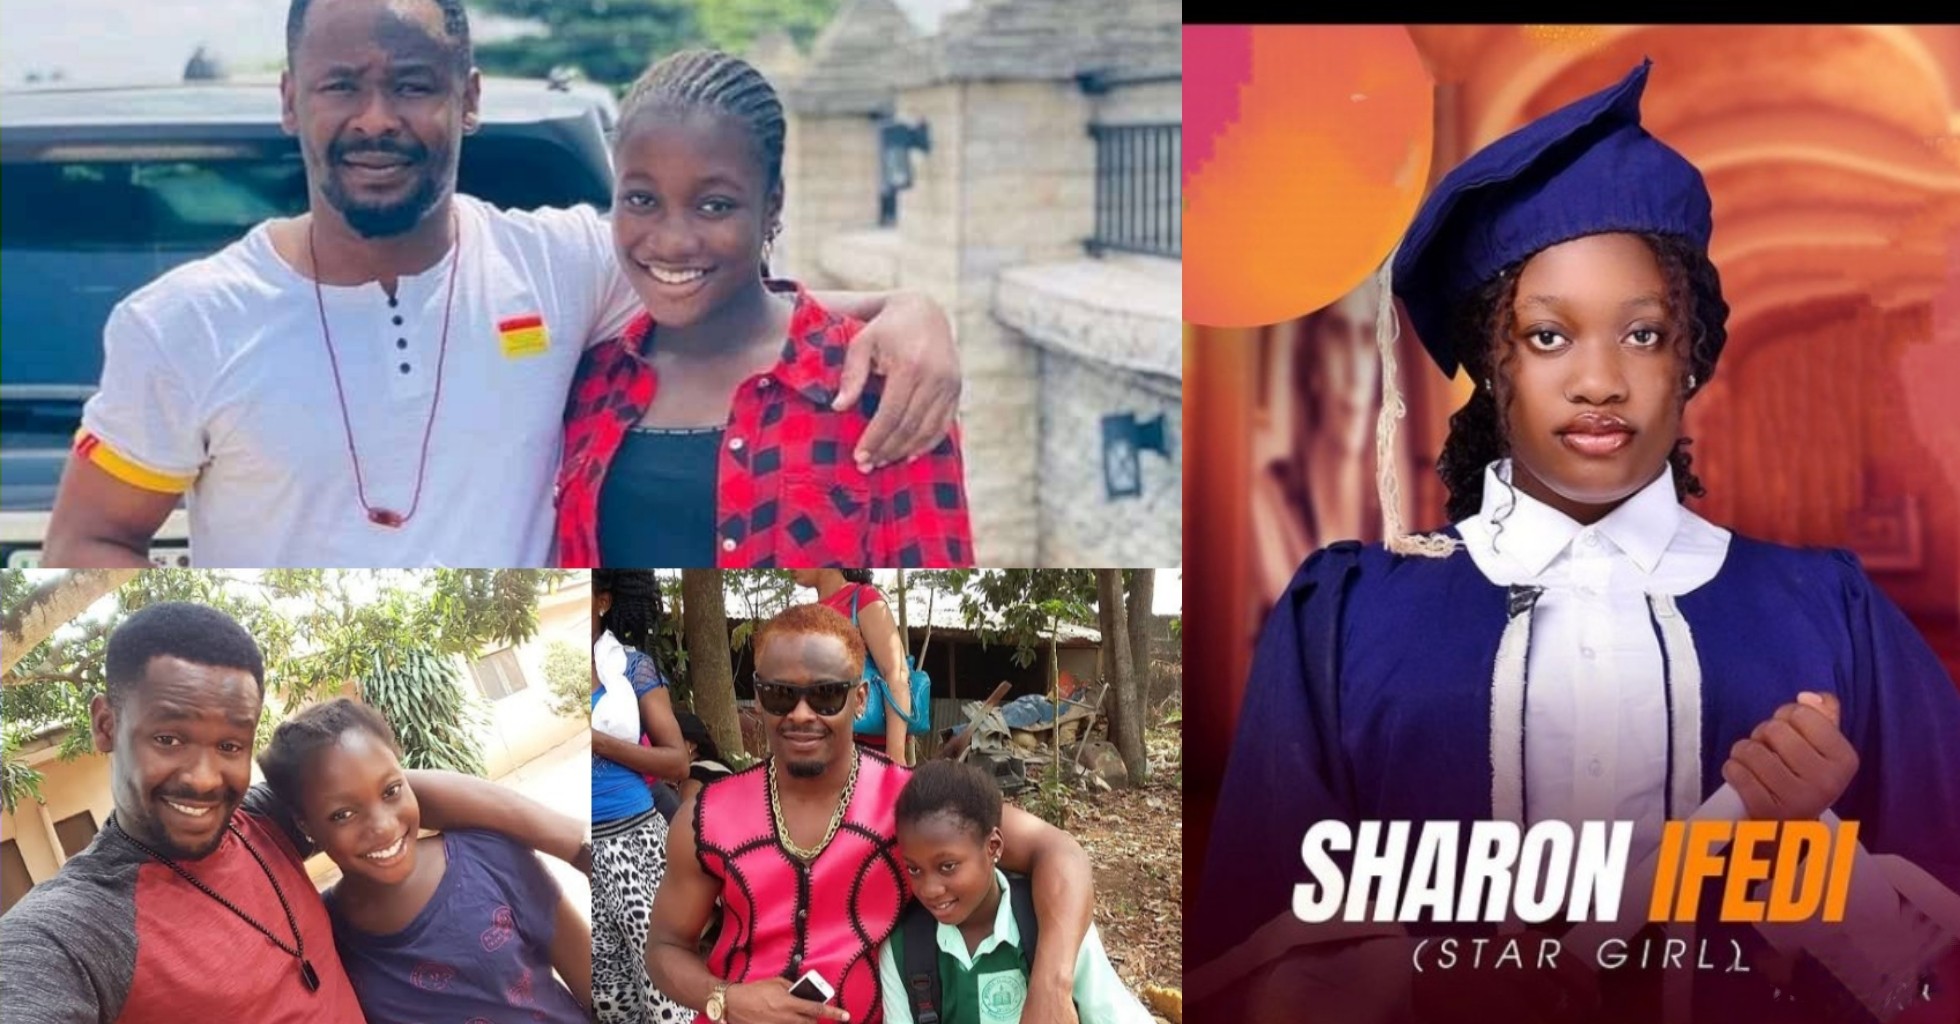 Zubby Michael responds as Teen Actress Ifedi Sharon rolls out invites for secondary school graduation party